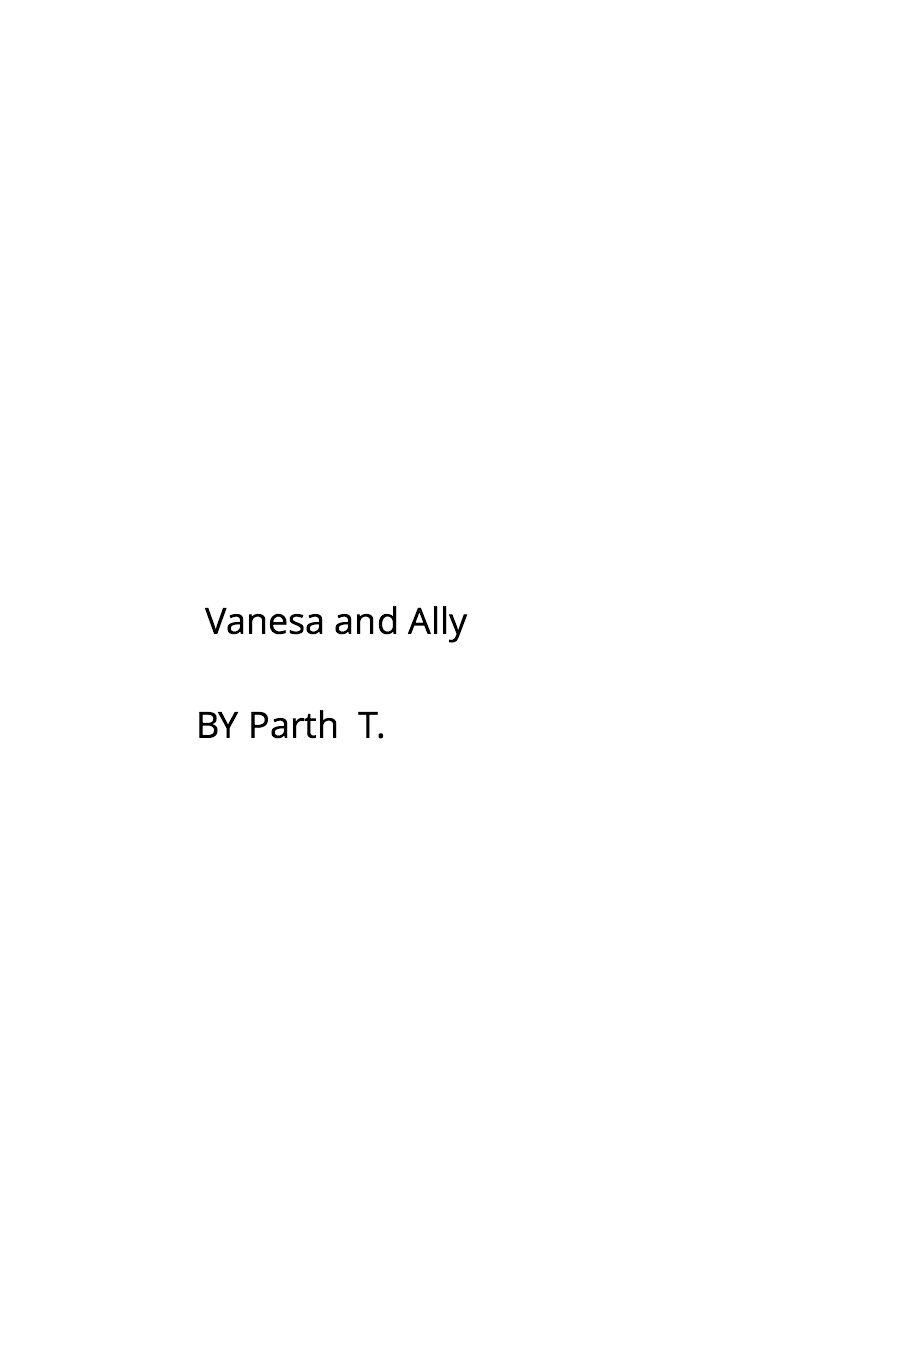 Vanessa and Ally by Parth T